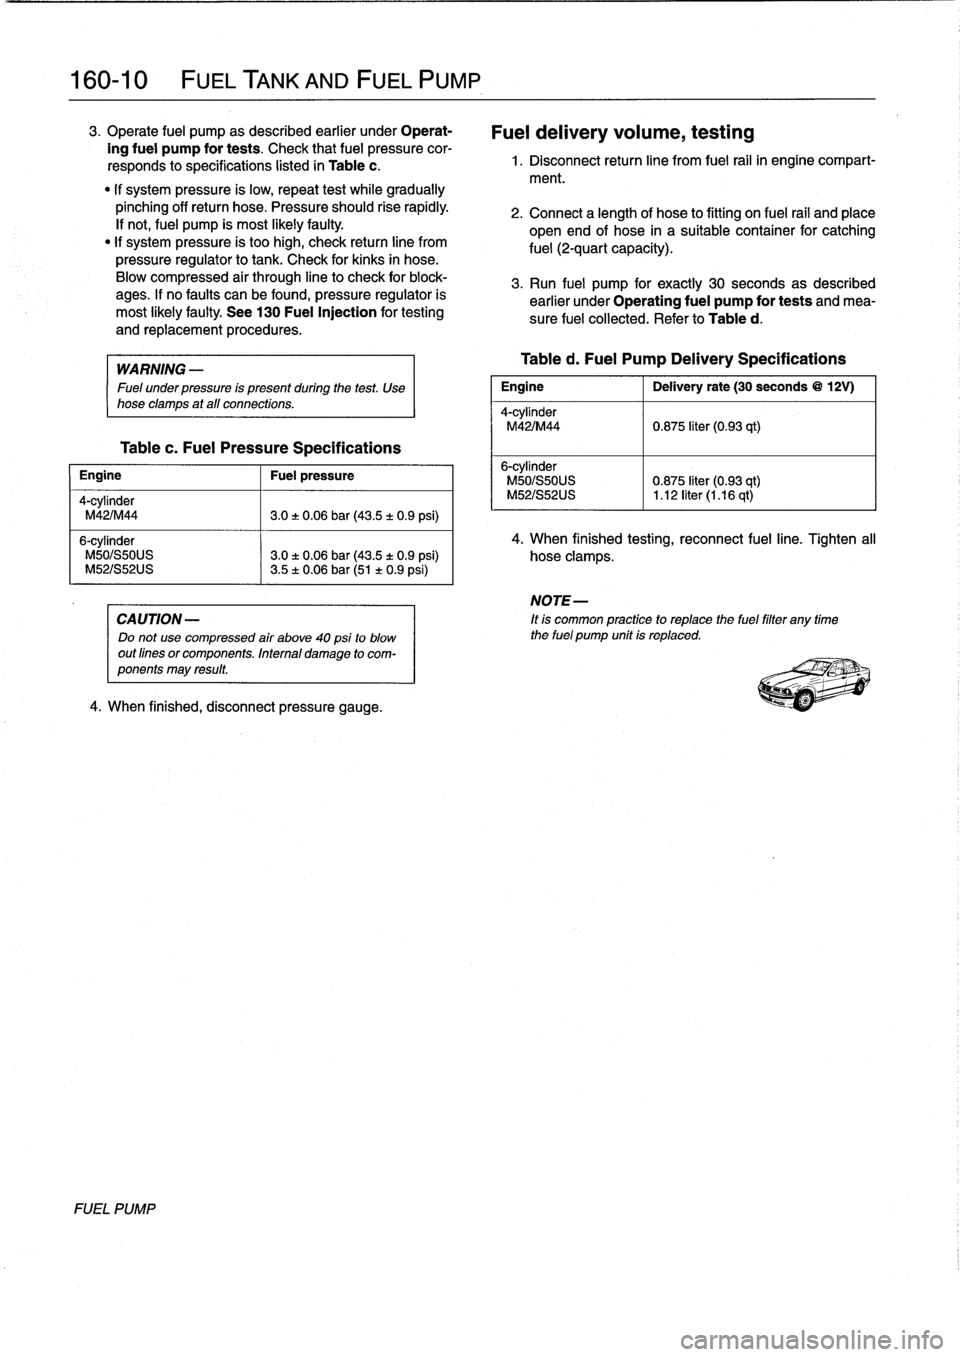 BMW 318i 1997 E36 Service Manual 
160-
1
0

	

FUEL
TANK
AND
FUEL
PUMP

3
.
Operate
fuel
pump
as
described
earlier
under
Operat-

ing
fuel
pump
for
tests
.
Check
that
fuel
pressure
cor-

responds
to
specifications
listed
in
Table
c
.